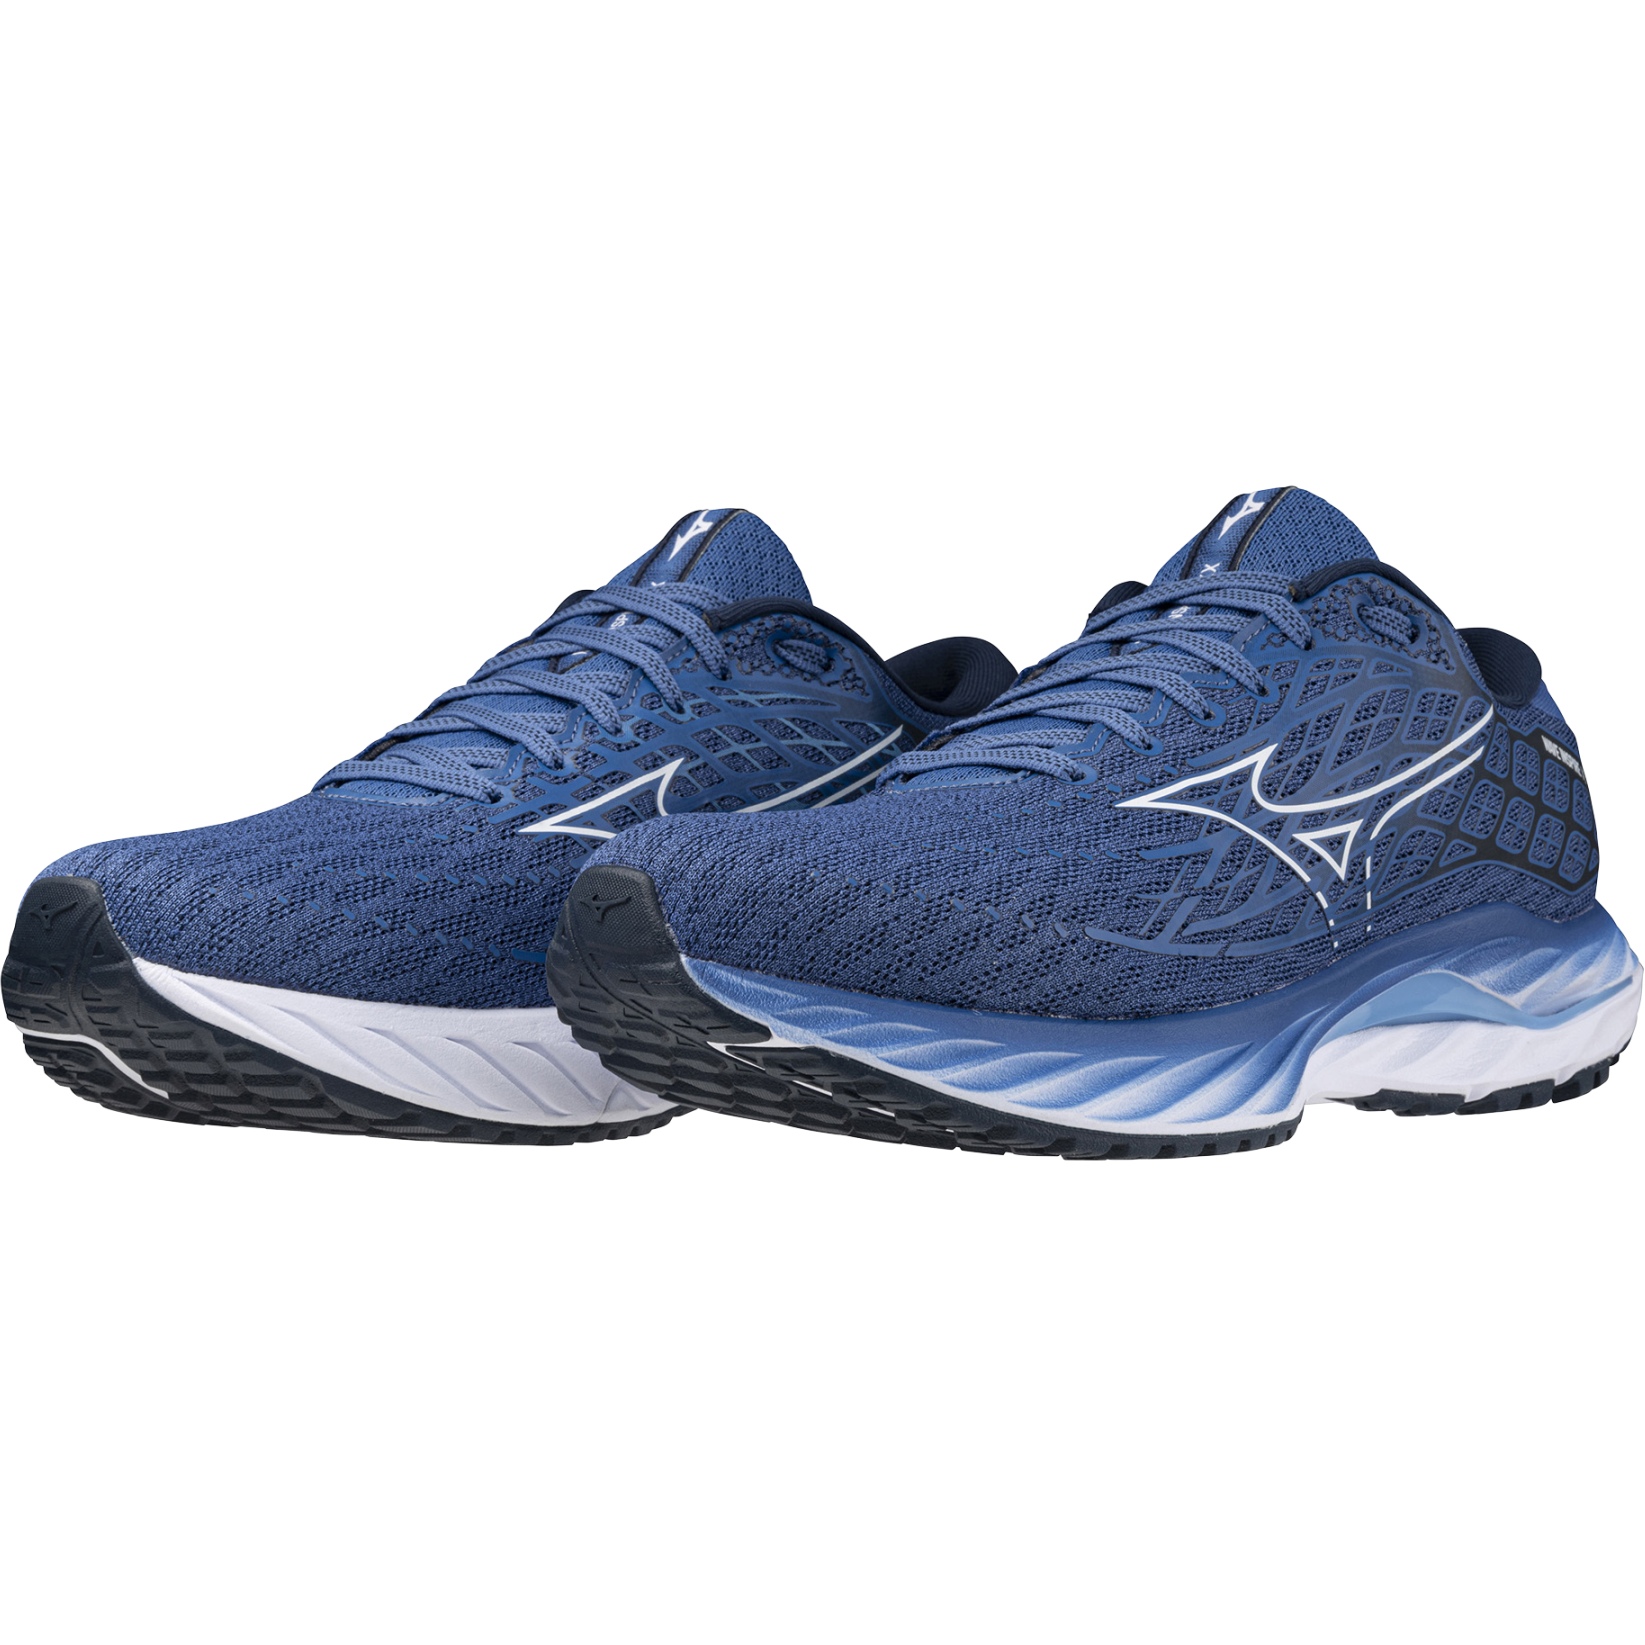 Picture of Mizuno Wave Inspire 20 Running Shoes Men - Federal Blue / White / Alaskan Blue